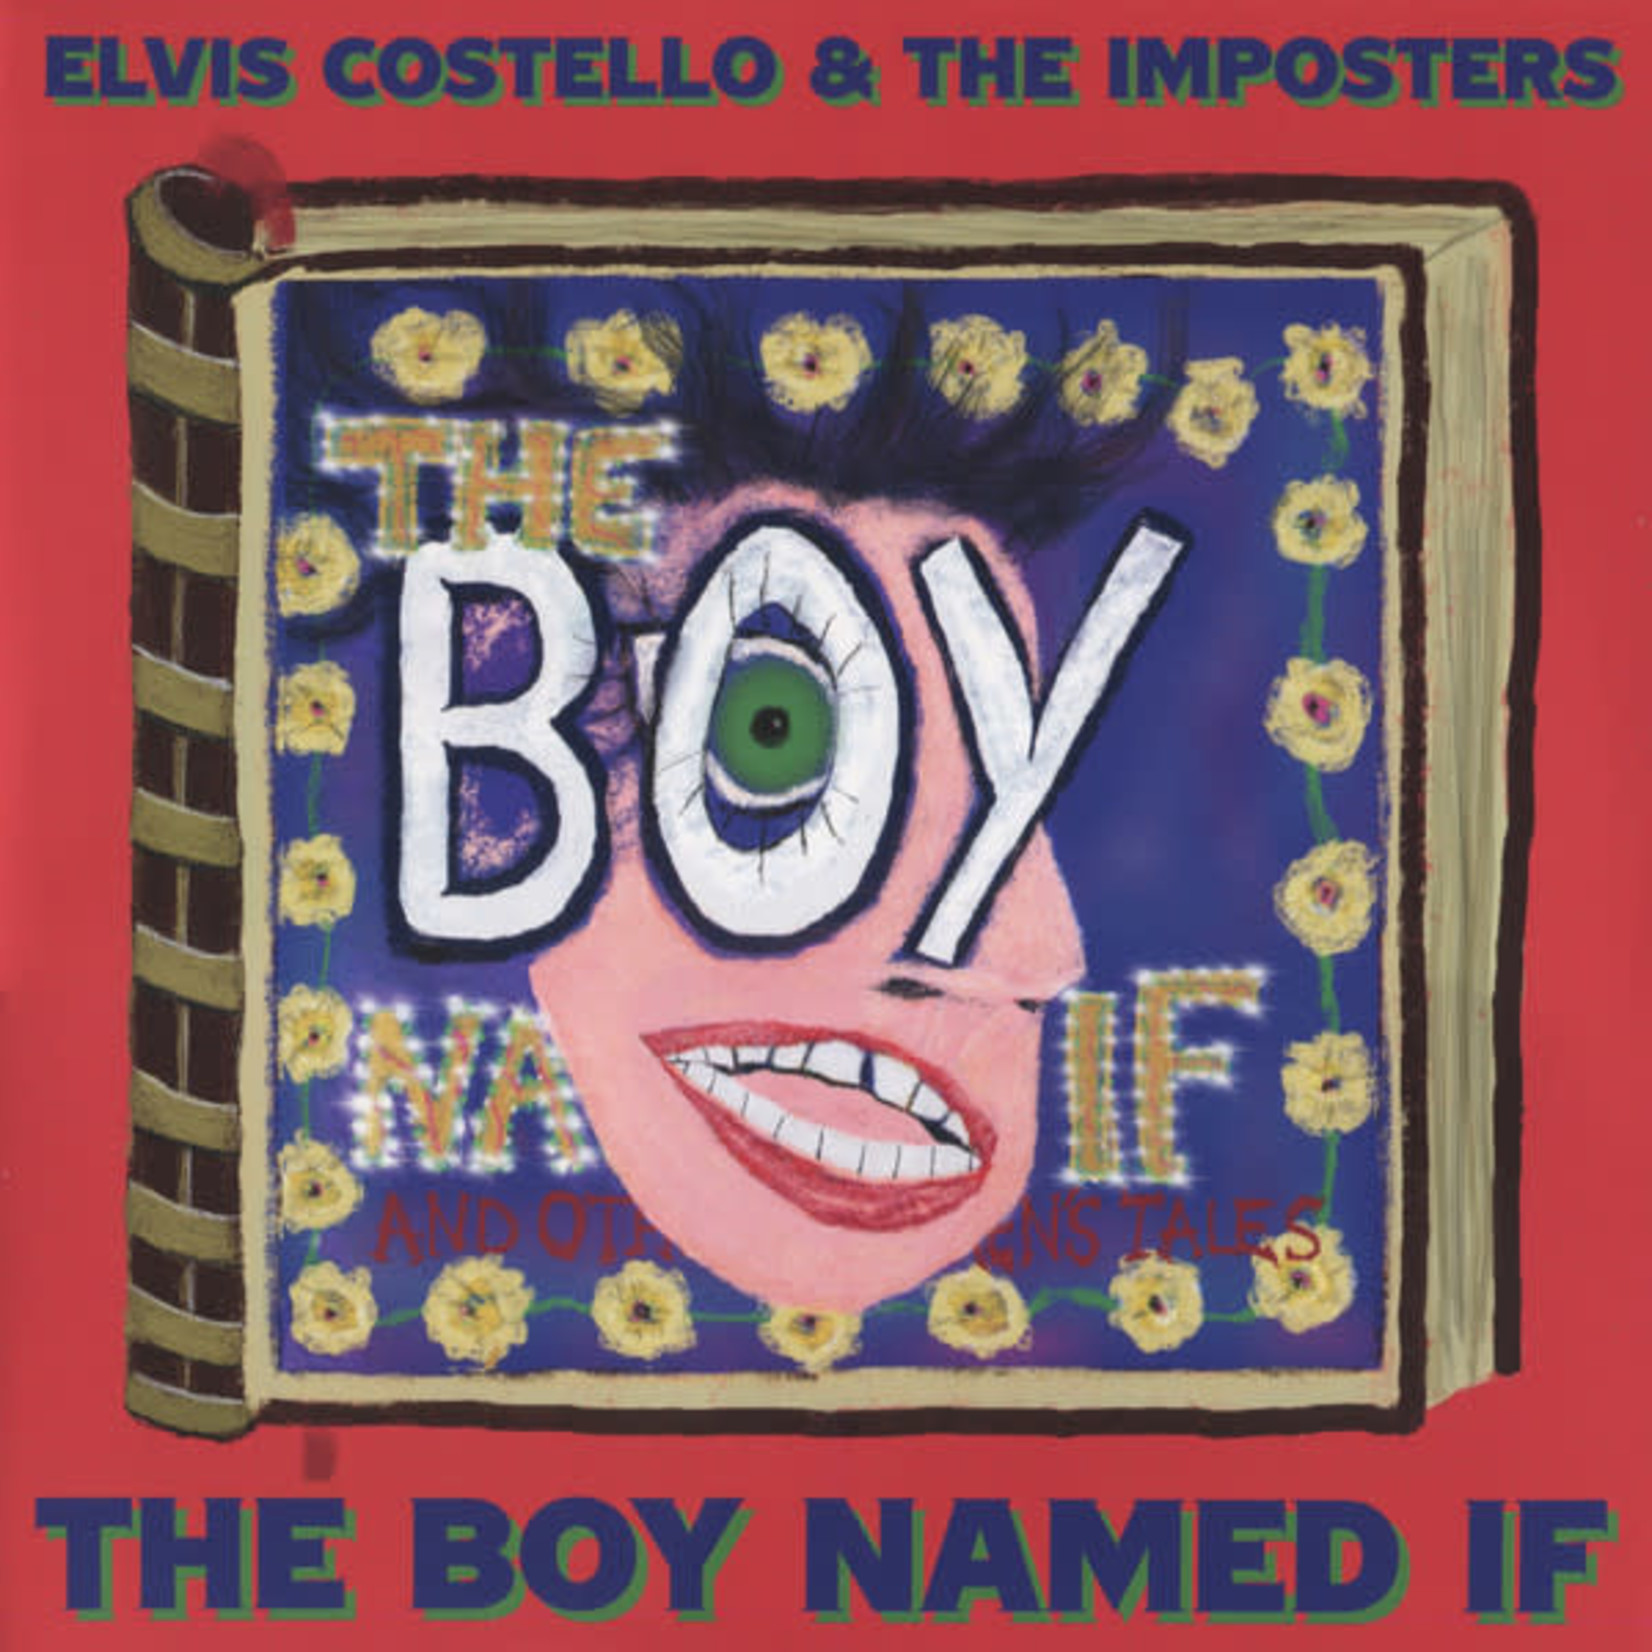 Capitol Elvis Costello & The Imposters - The Boy Named If (2LP)